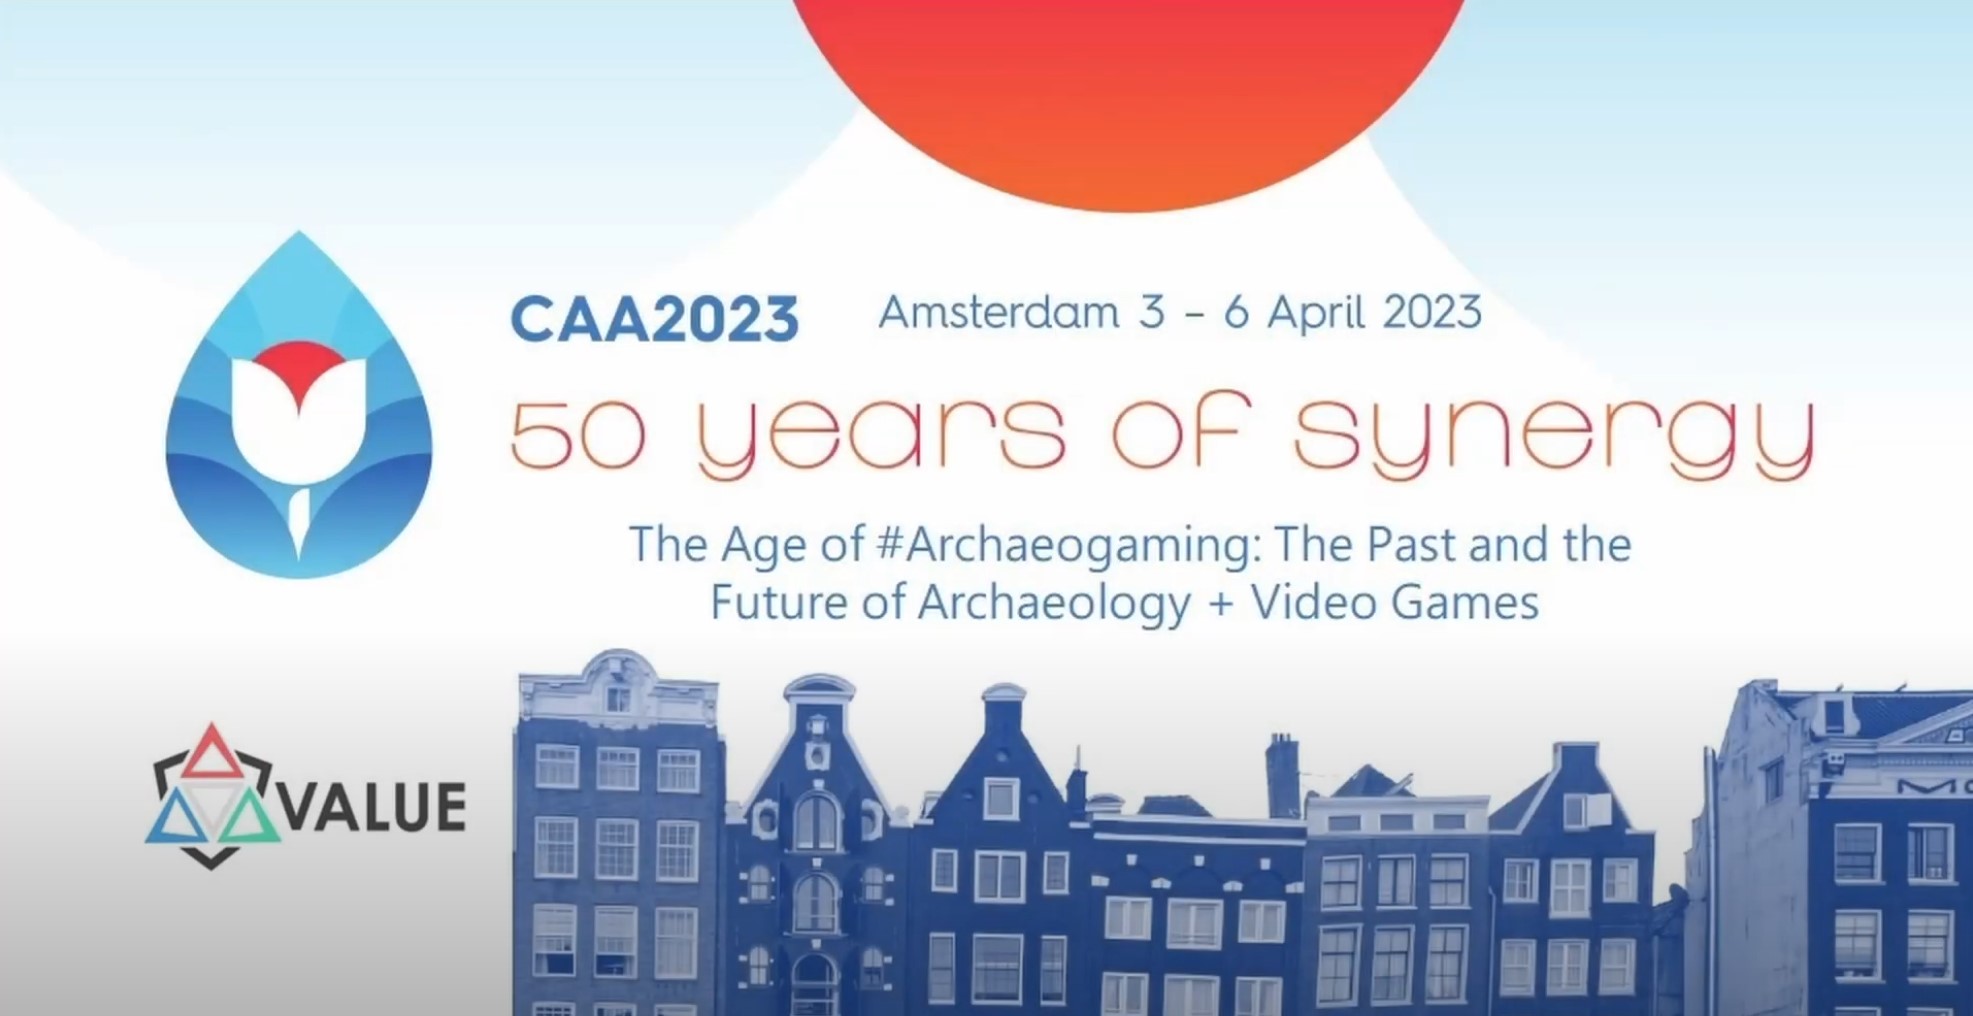 This is a title image for the CAA 2023 session on Archaeogaming